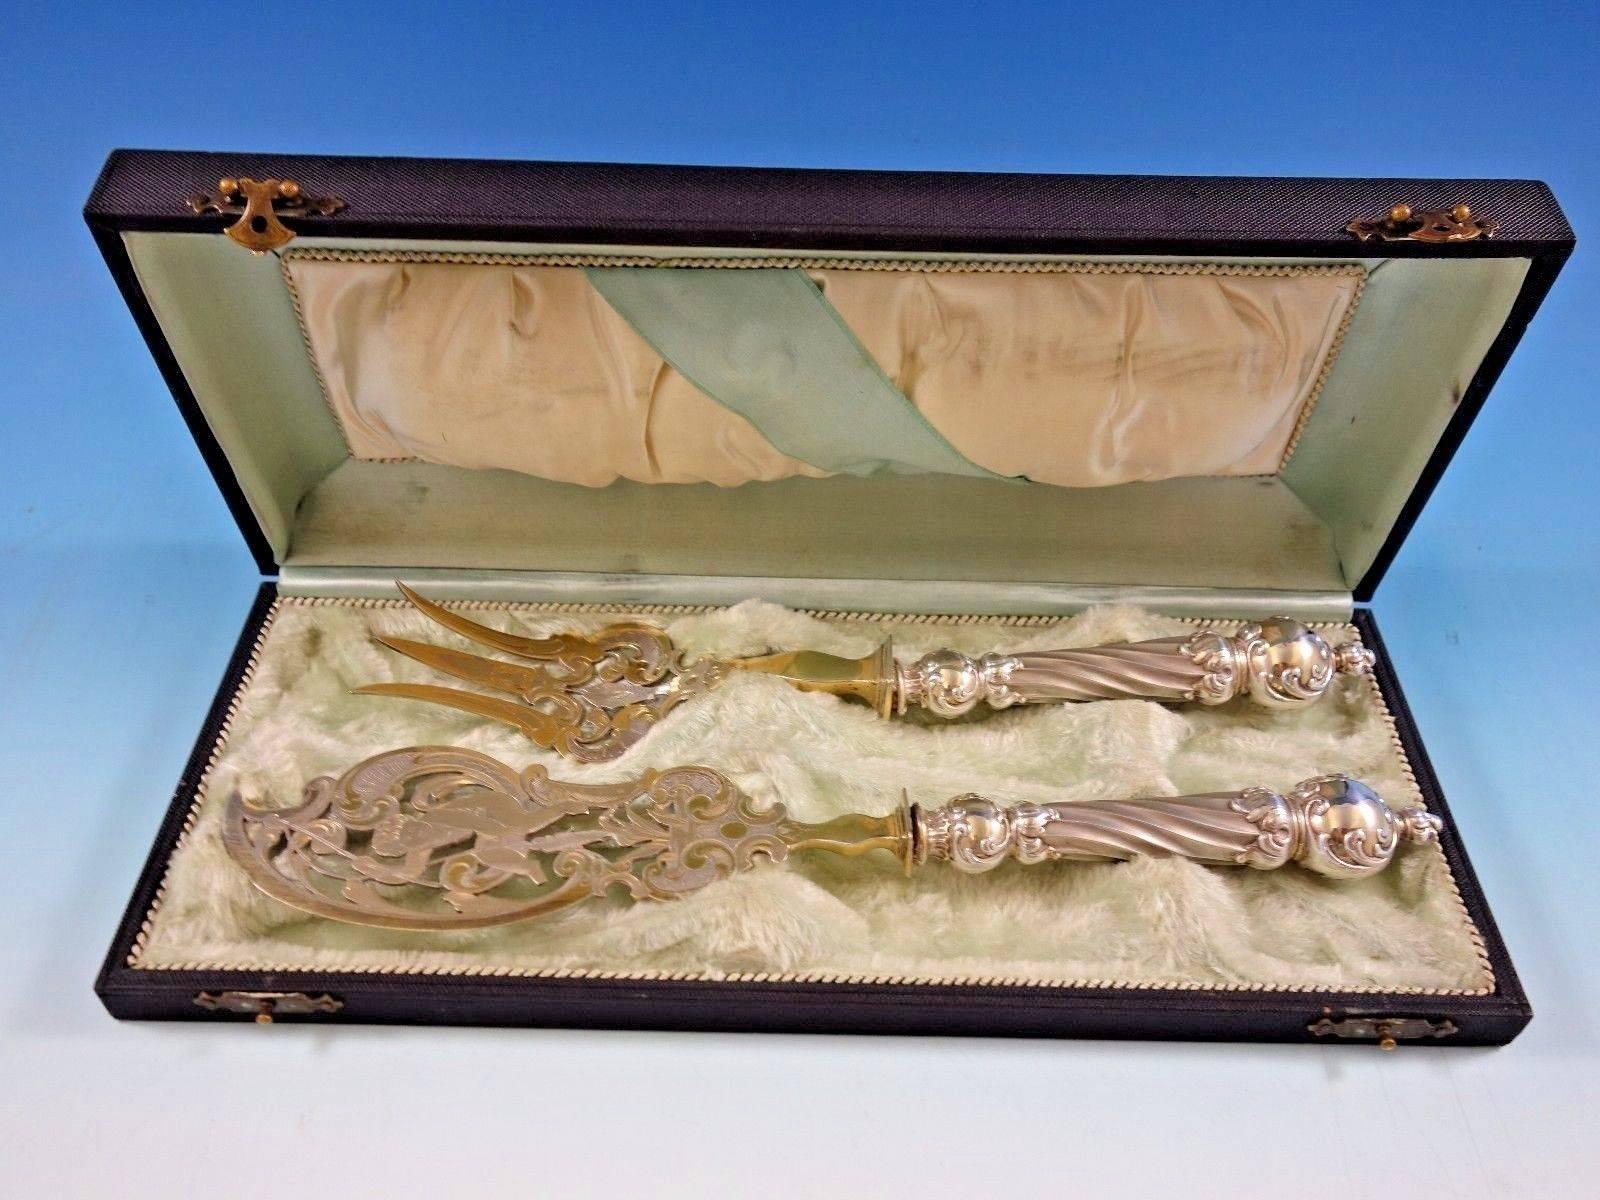 Gorgeous European art silver .800 art silver fish serving set, two-piece, with large bulbous column-like silver handles and partial gilt silver plate blades and tines. 

The knife measures 11 3/8